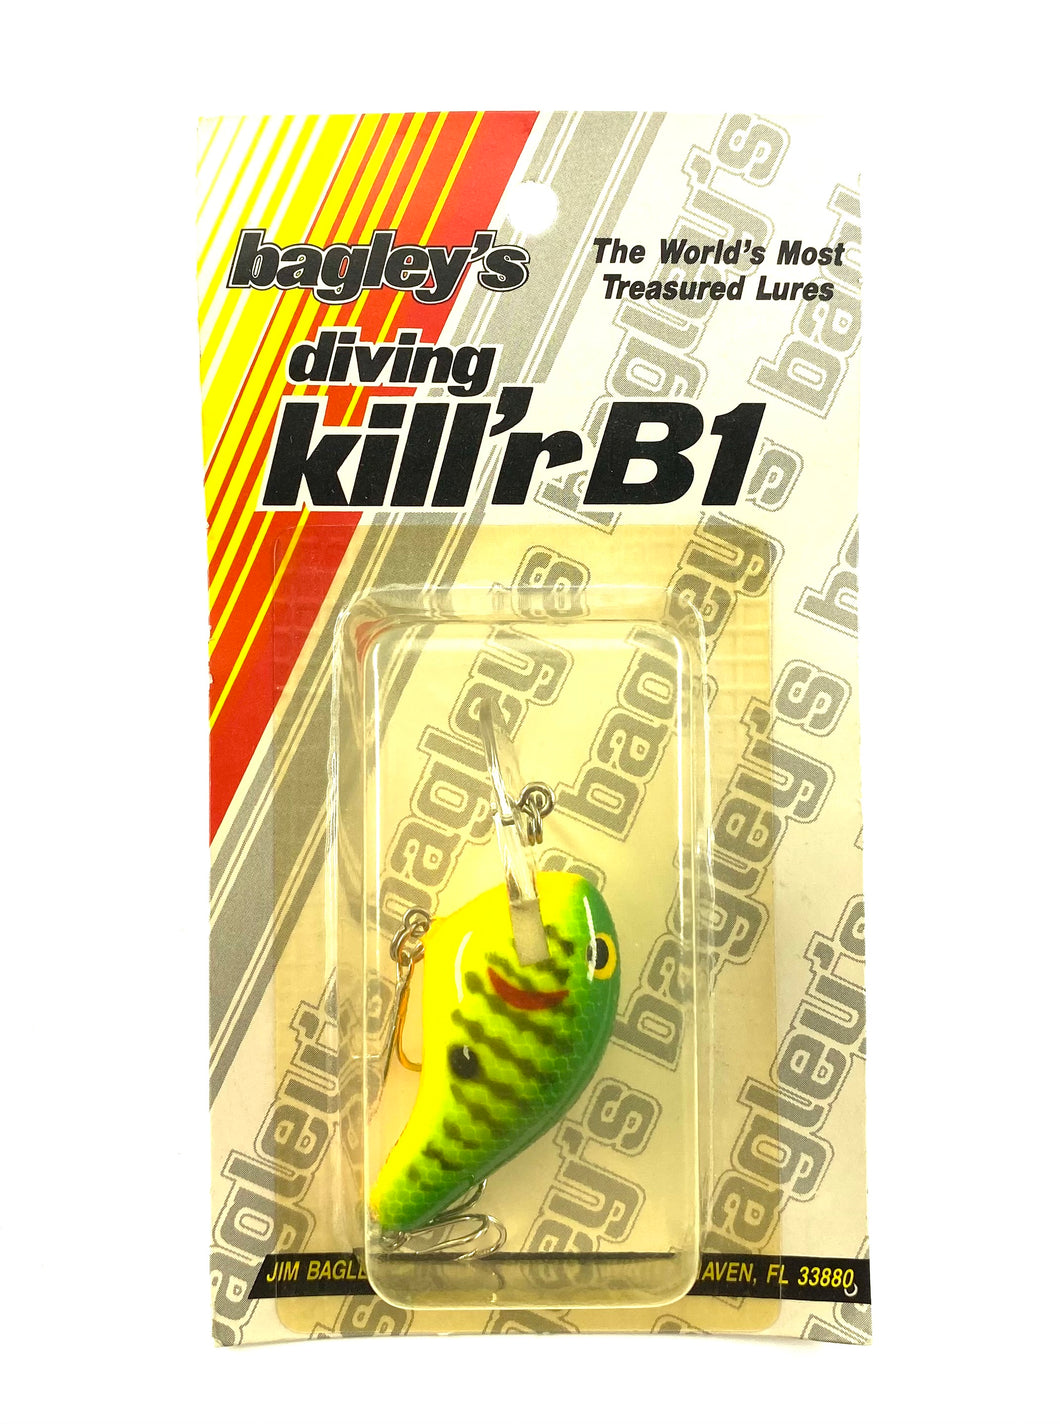 BAGLEY DIVING Killer B 1 Fishing Lure Fishing Lure in GREEN CRAYFISH on CHARTREUSE